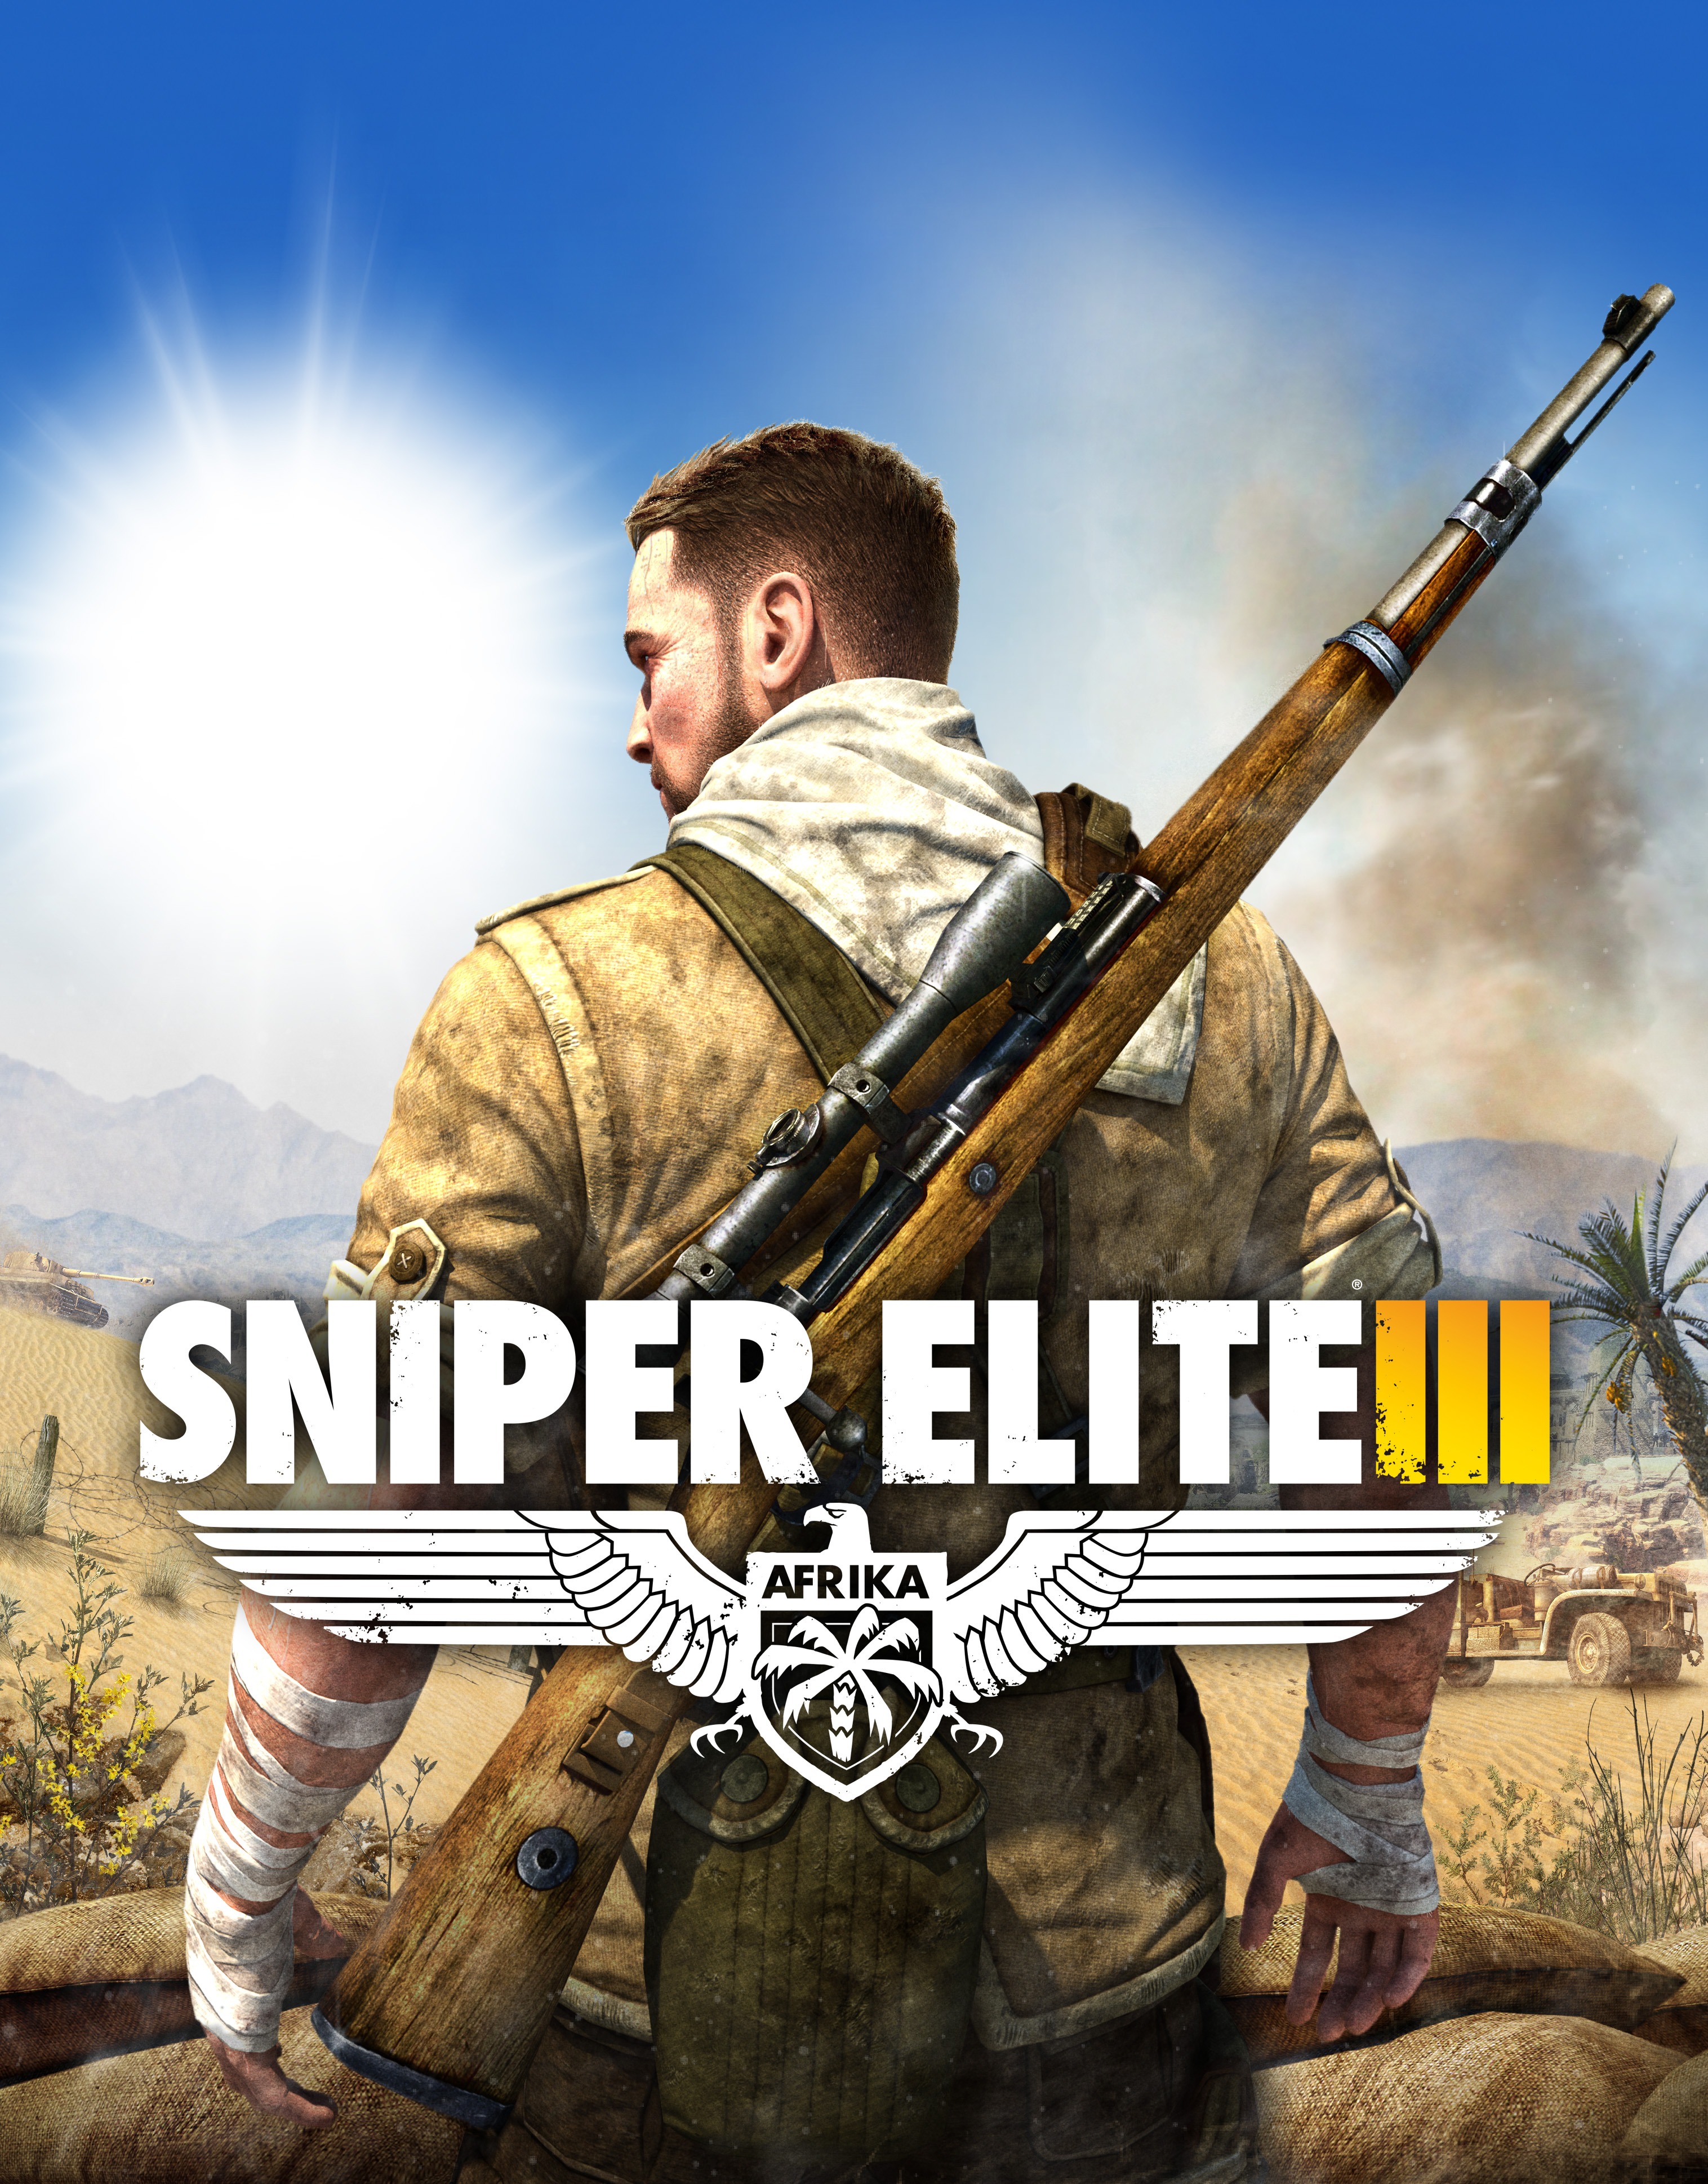 https://rozup.ir/up/narsis3/Pictures/Sniper-Elite-III-pc-cover-large.jpg